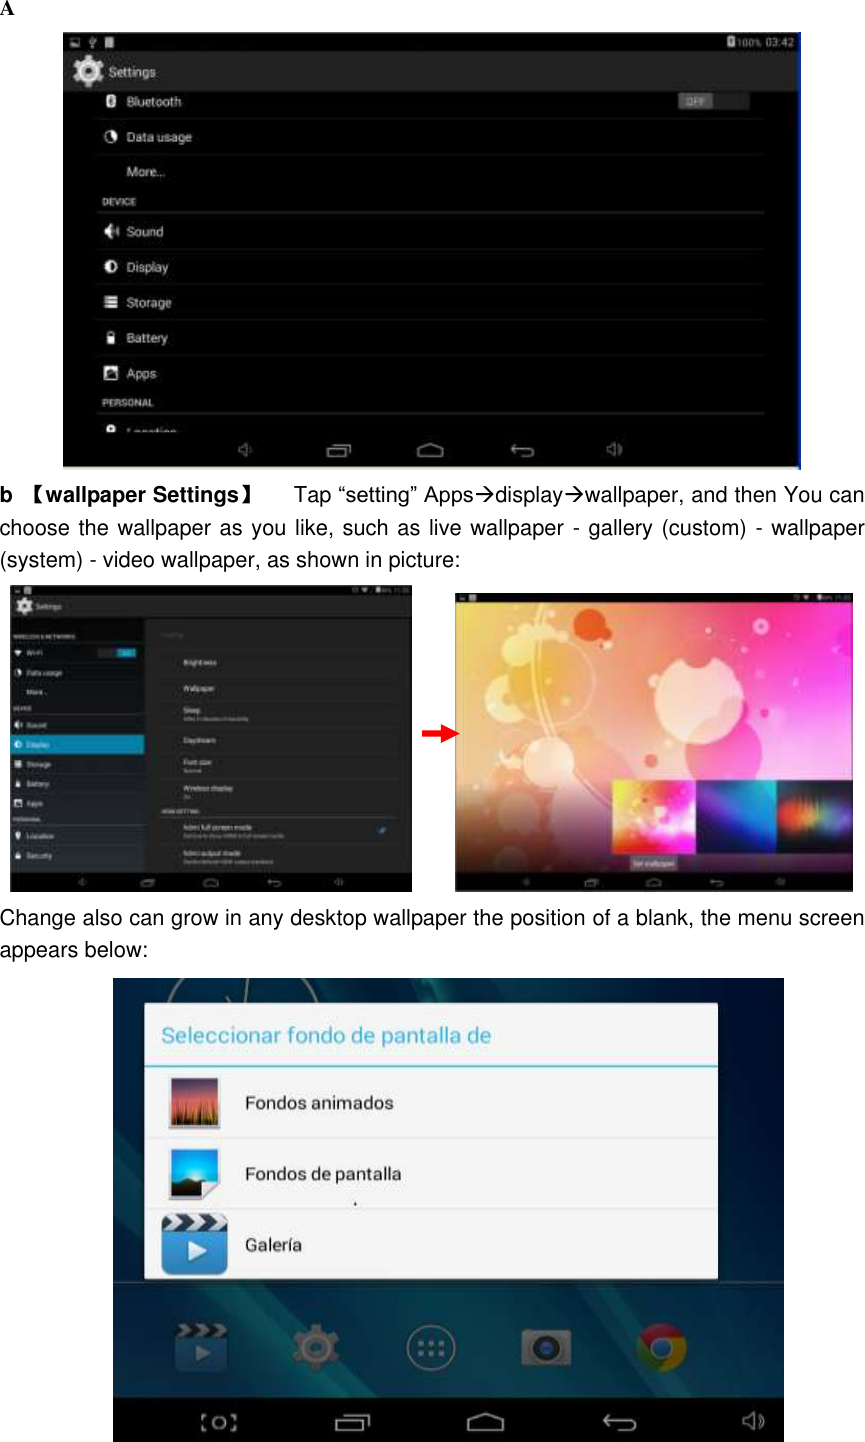 A  b  【wallpaper Settings】      Tap “setting” Appsdisplaywallpaper, and then You can choose the wallpaper as you like, such as live wallpaper - gallery (custom) - wallpaper (system) - video wallpaper, as shown in picture:            Change also can grow in any desktop wallpaper the position of a blank, the menu screen appears below:  